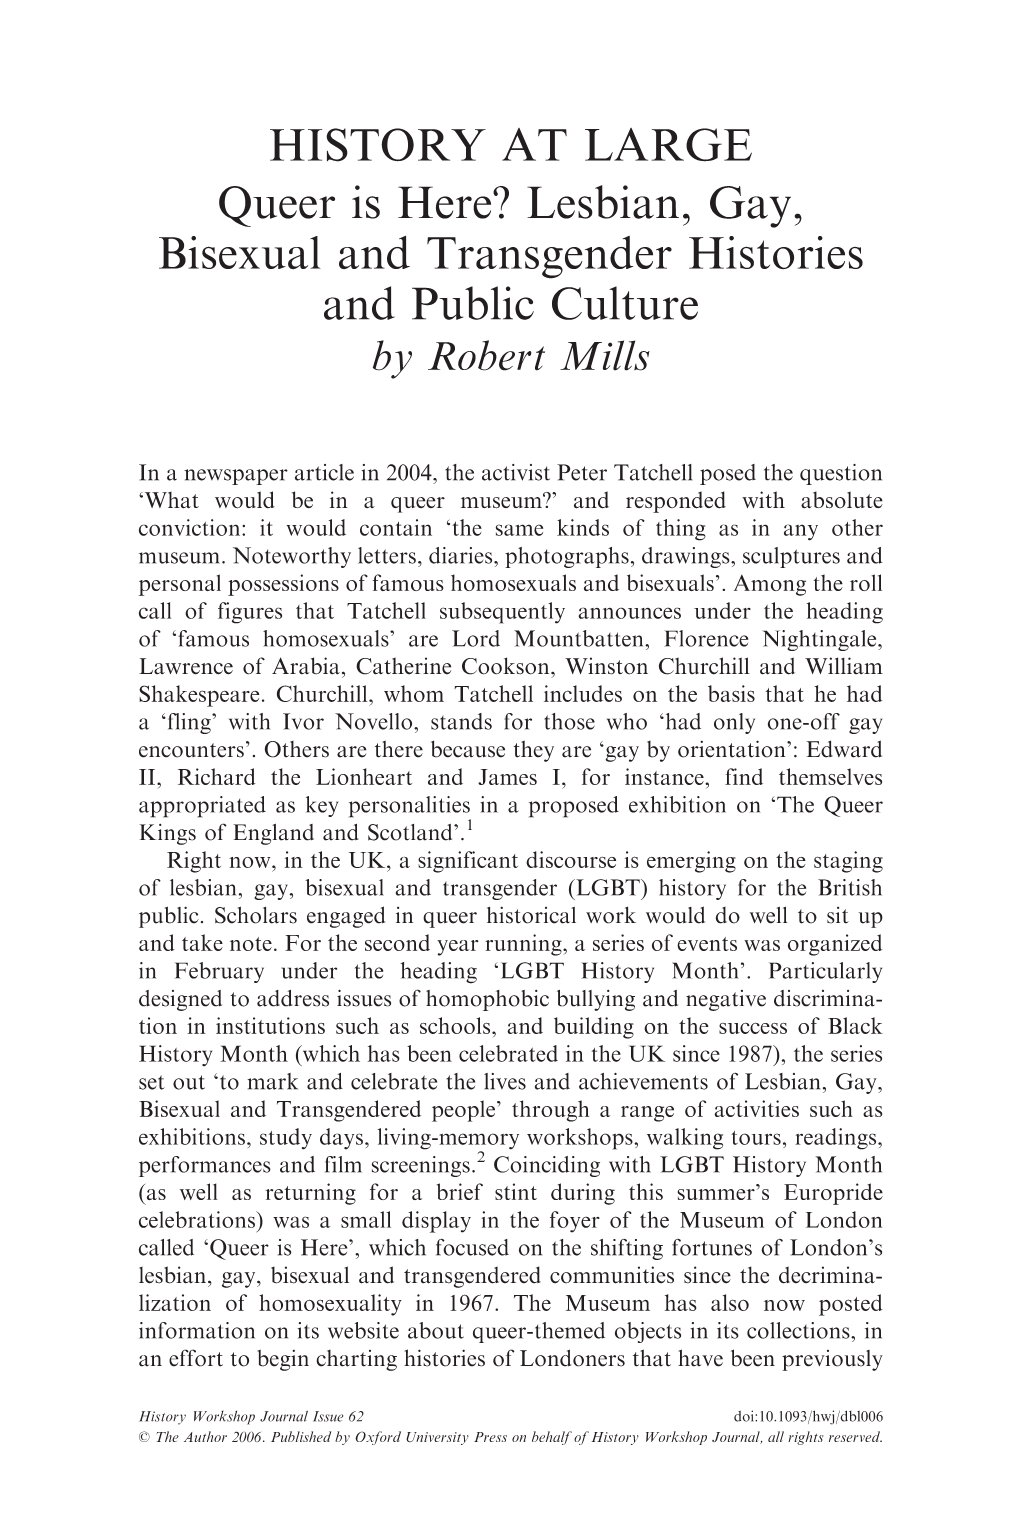 Queer Is Here? Lesbian, Gay, Bisexual and Transgender Histories and Public Culture by Robert Mills